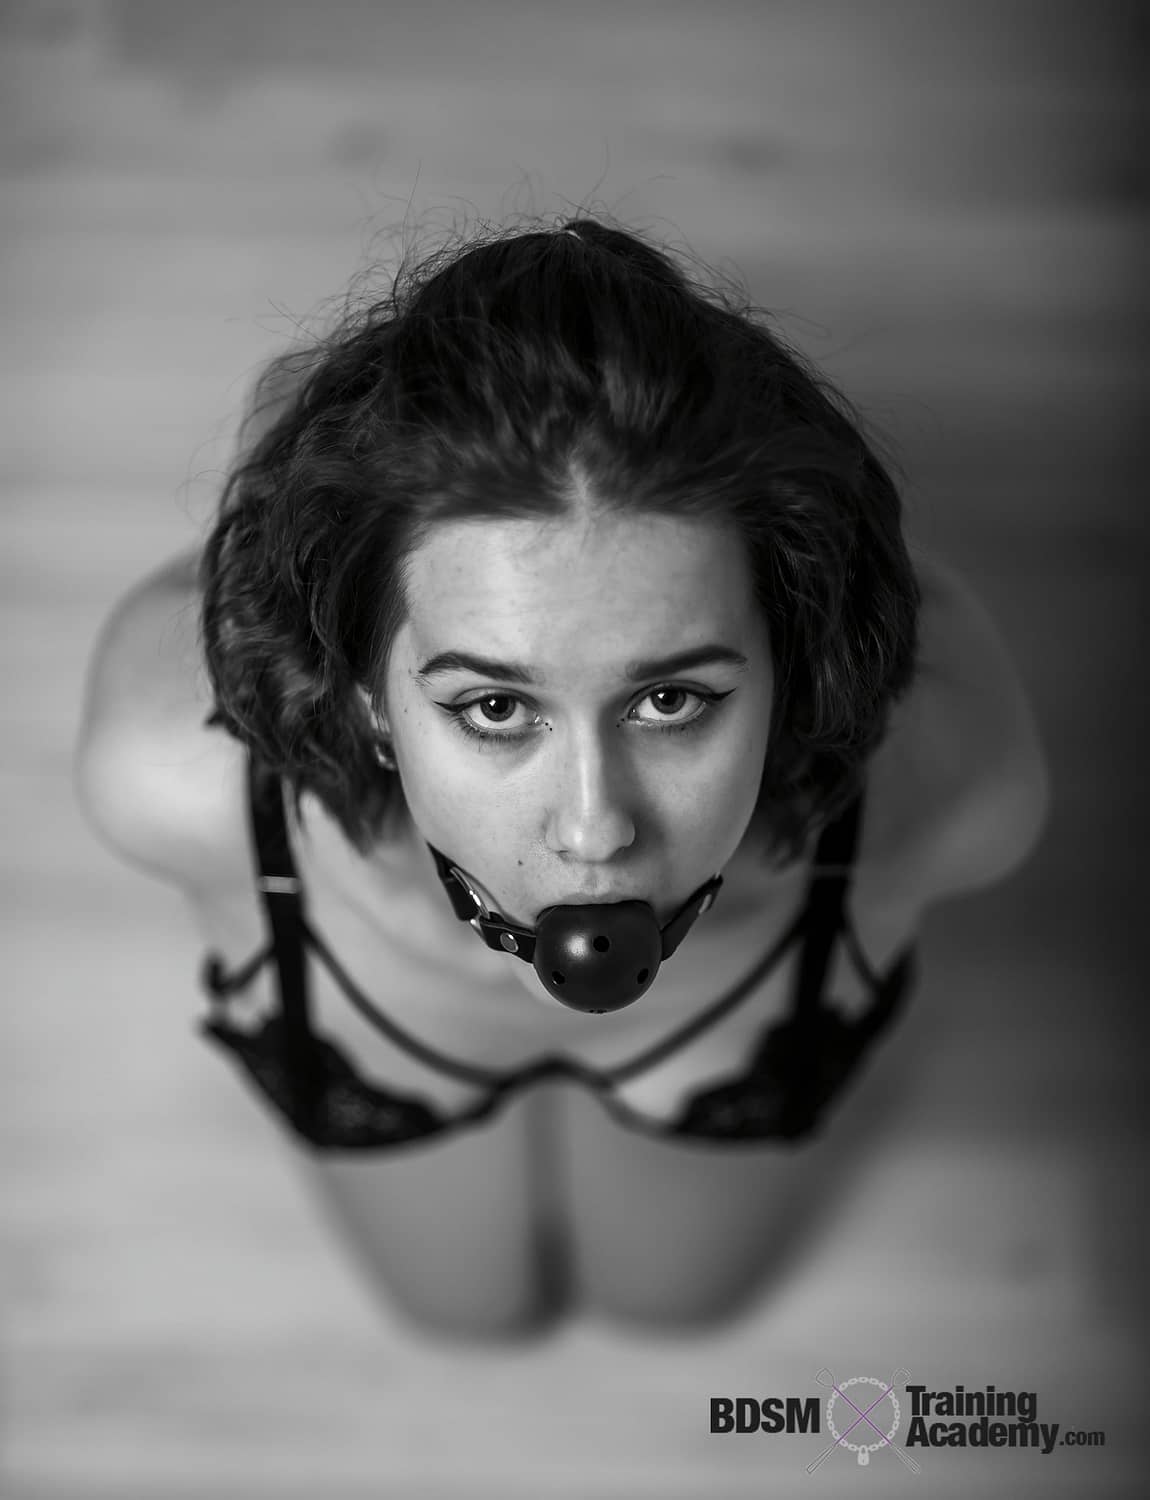 BDSM Fear Play with submissive on their knees and gagged